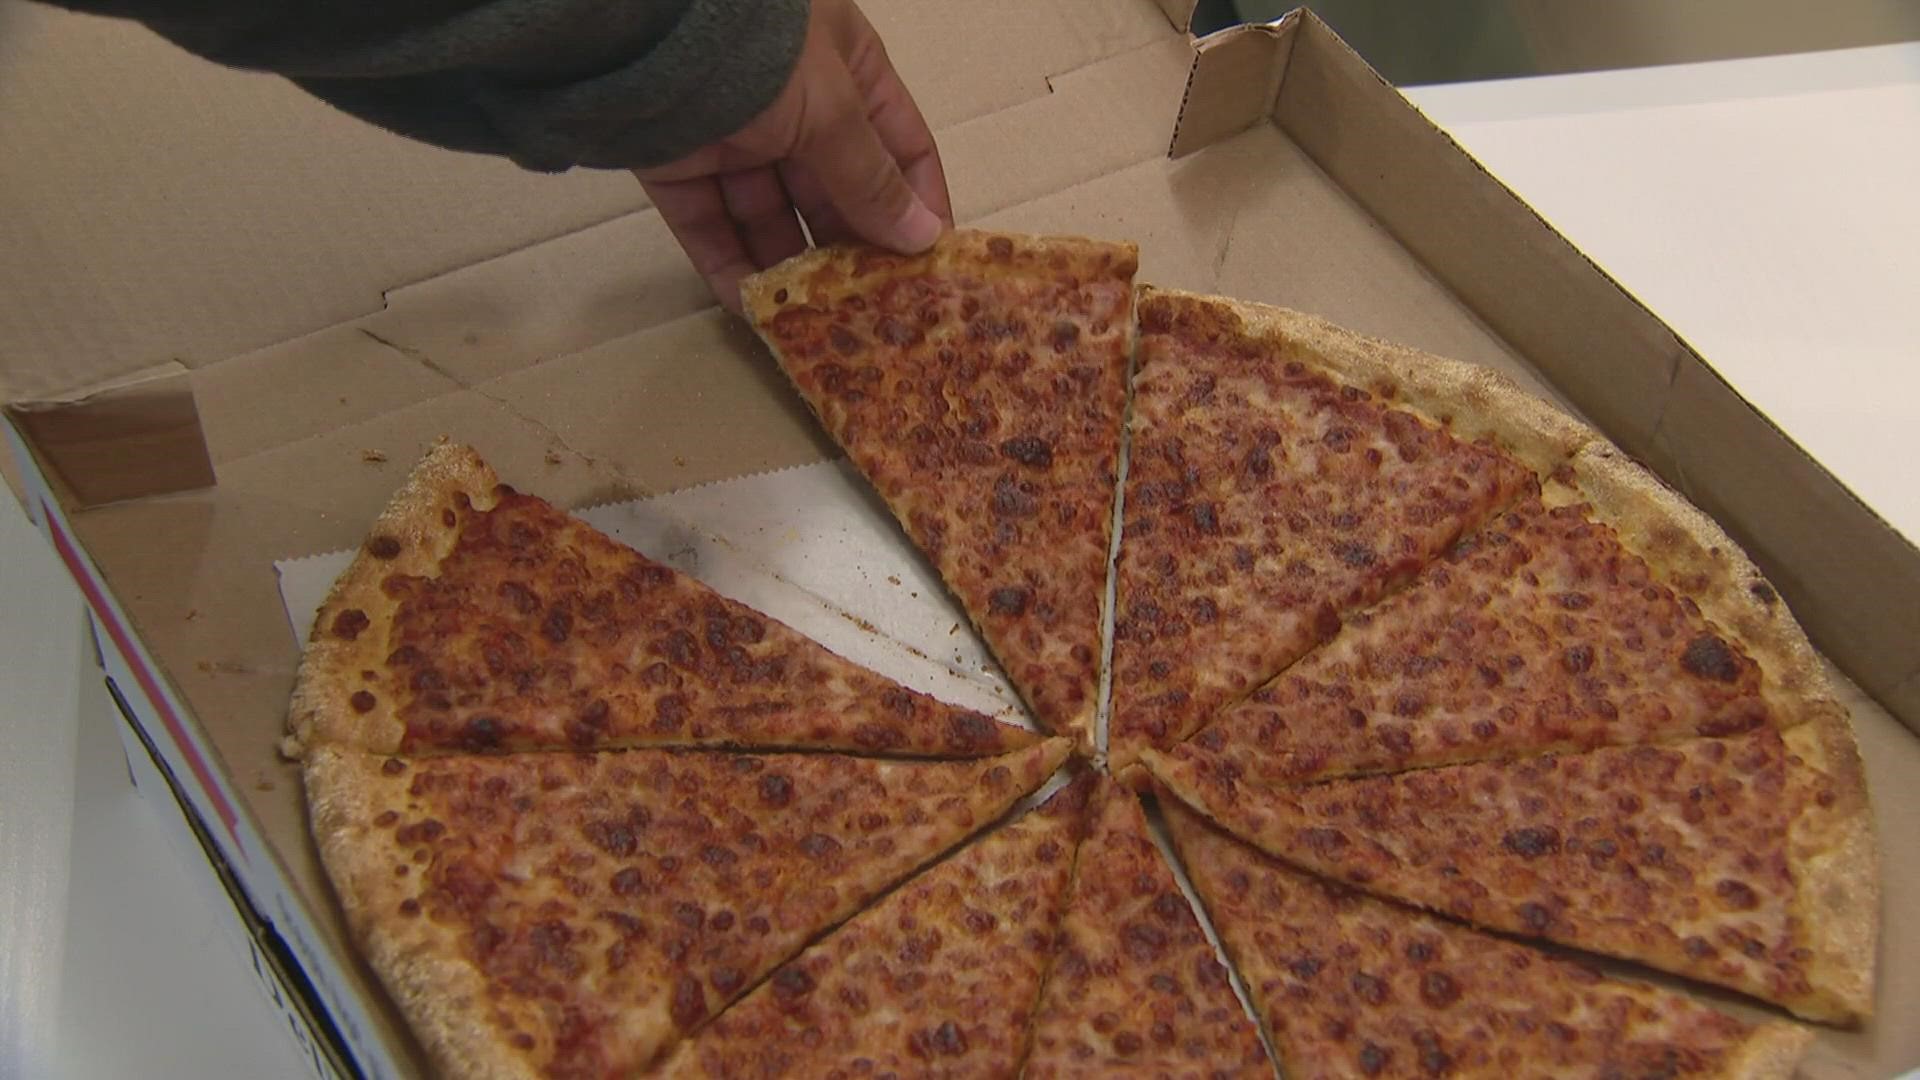 Some St. Louis-area businesses are offering deals on pizza Thursday for the national holiday.